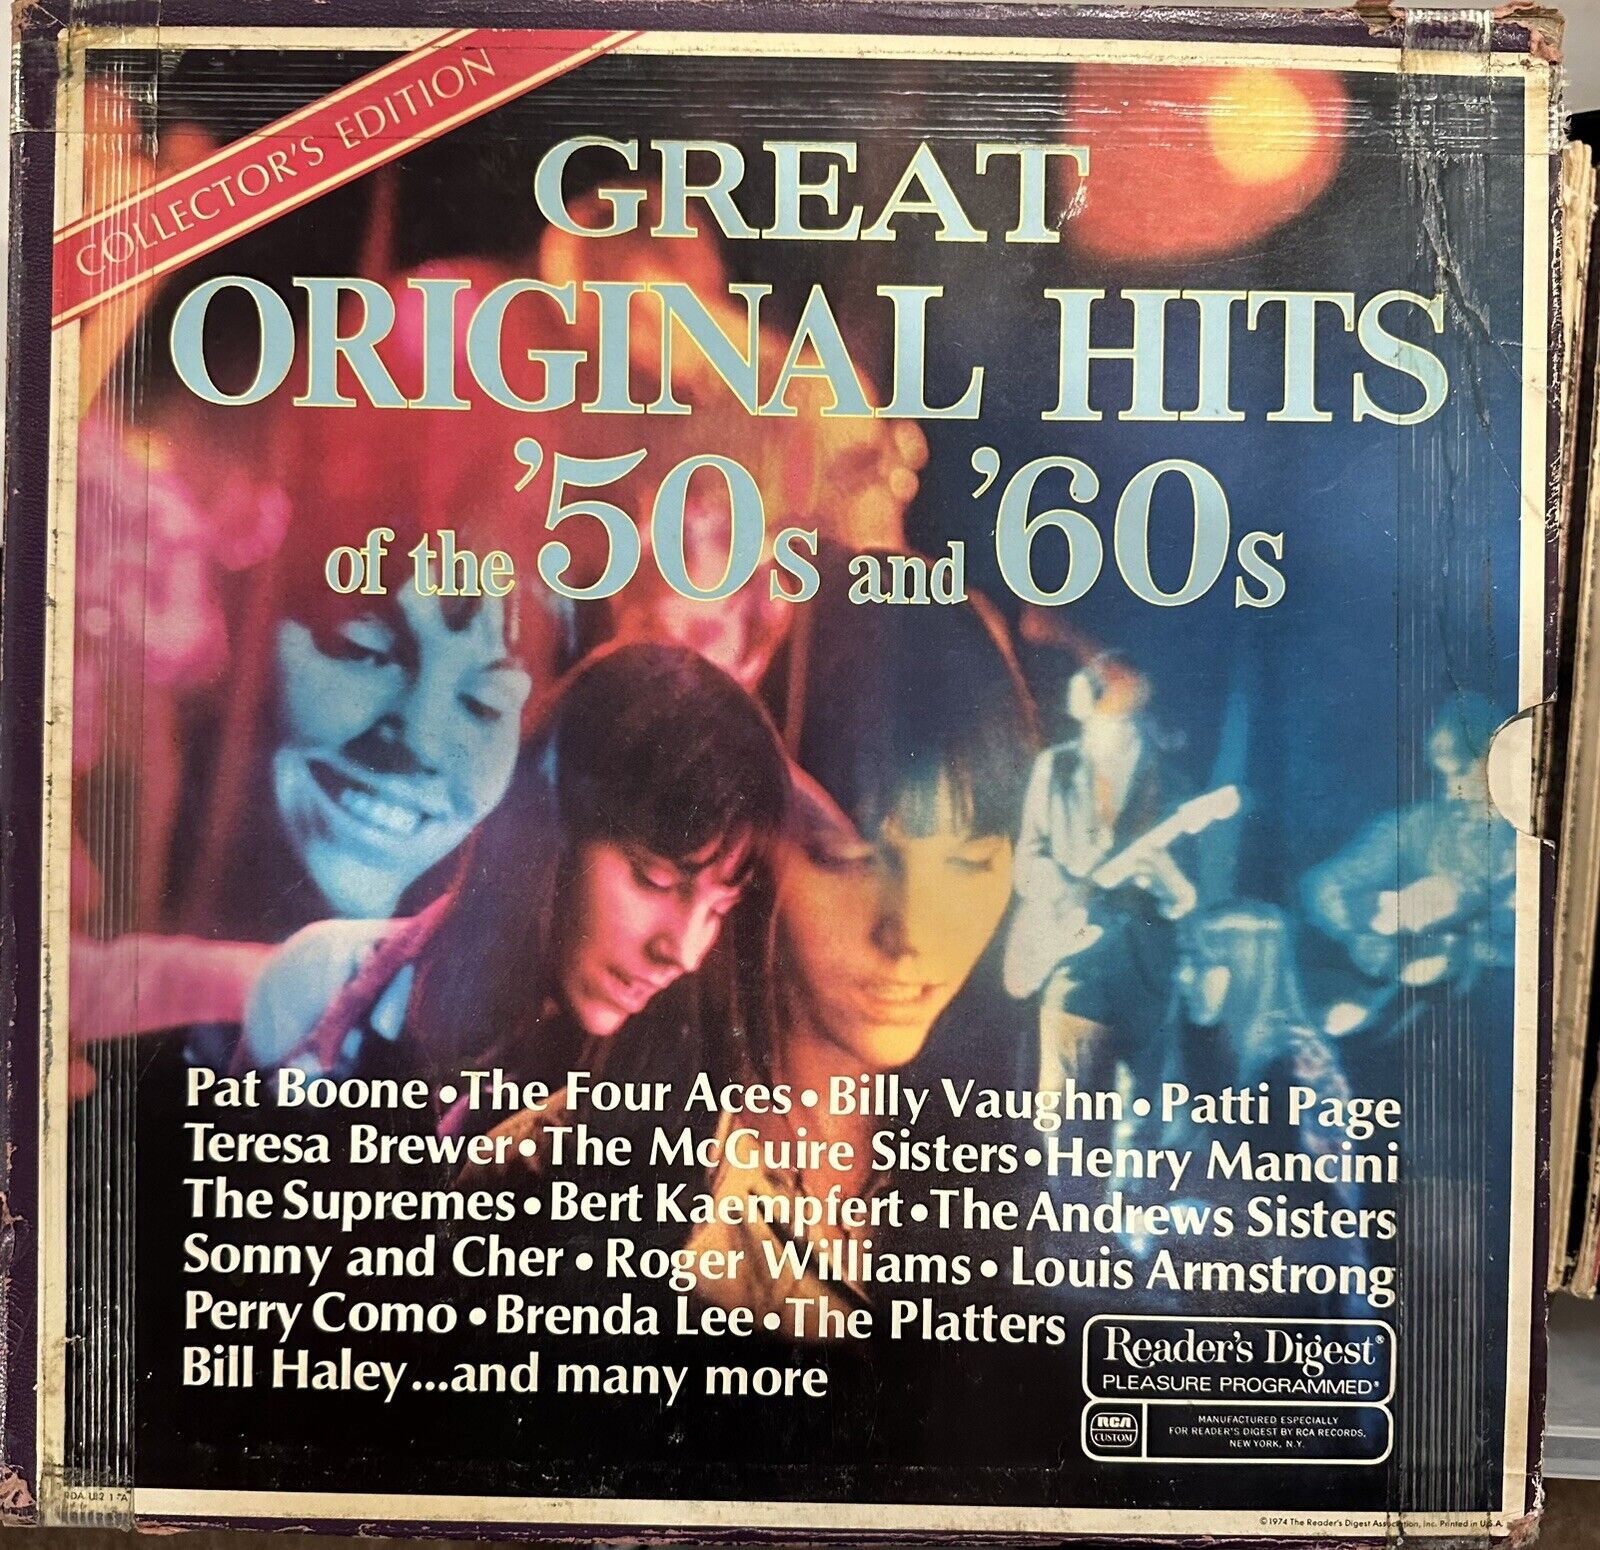 Vintage 1974 GREAT ORIGINAL HITS 50’s and 60’s Vinyl Record